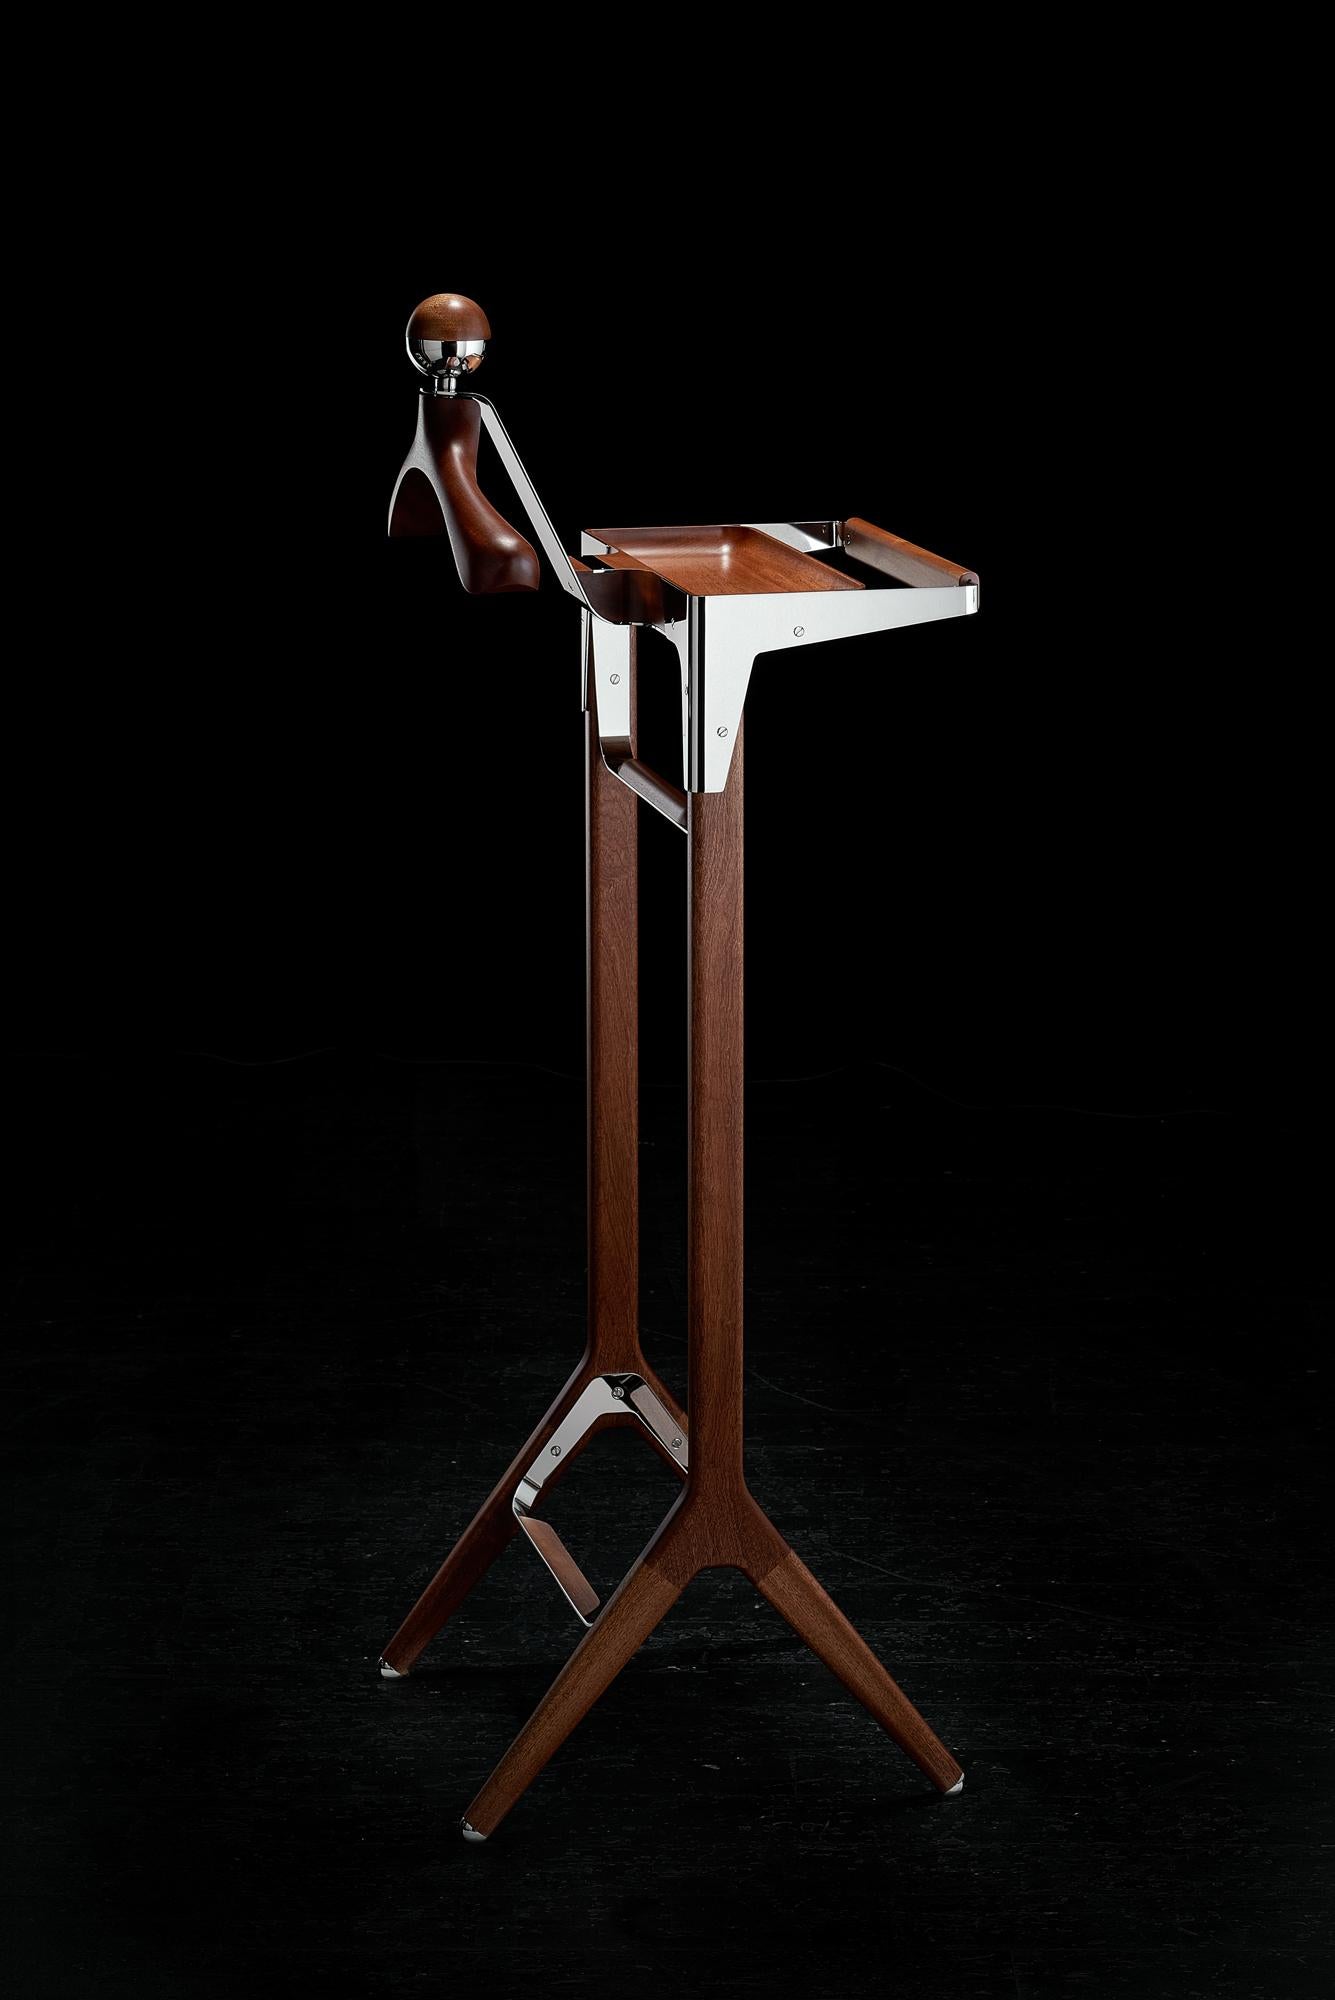 Through exclusive attention to detail this stylish gentleman's valet stand is a manifestation of cohesion between British master craftsmanship and classical design to celebrate the passion we share with you for the highest quality sartorial